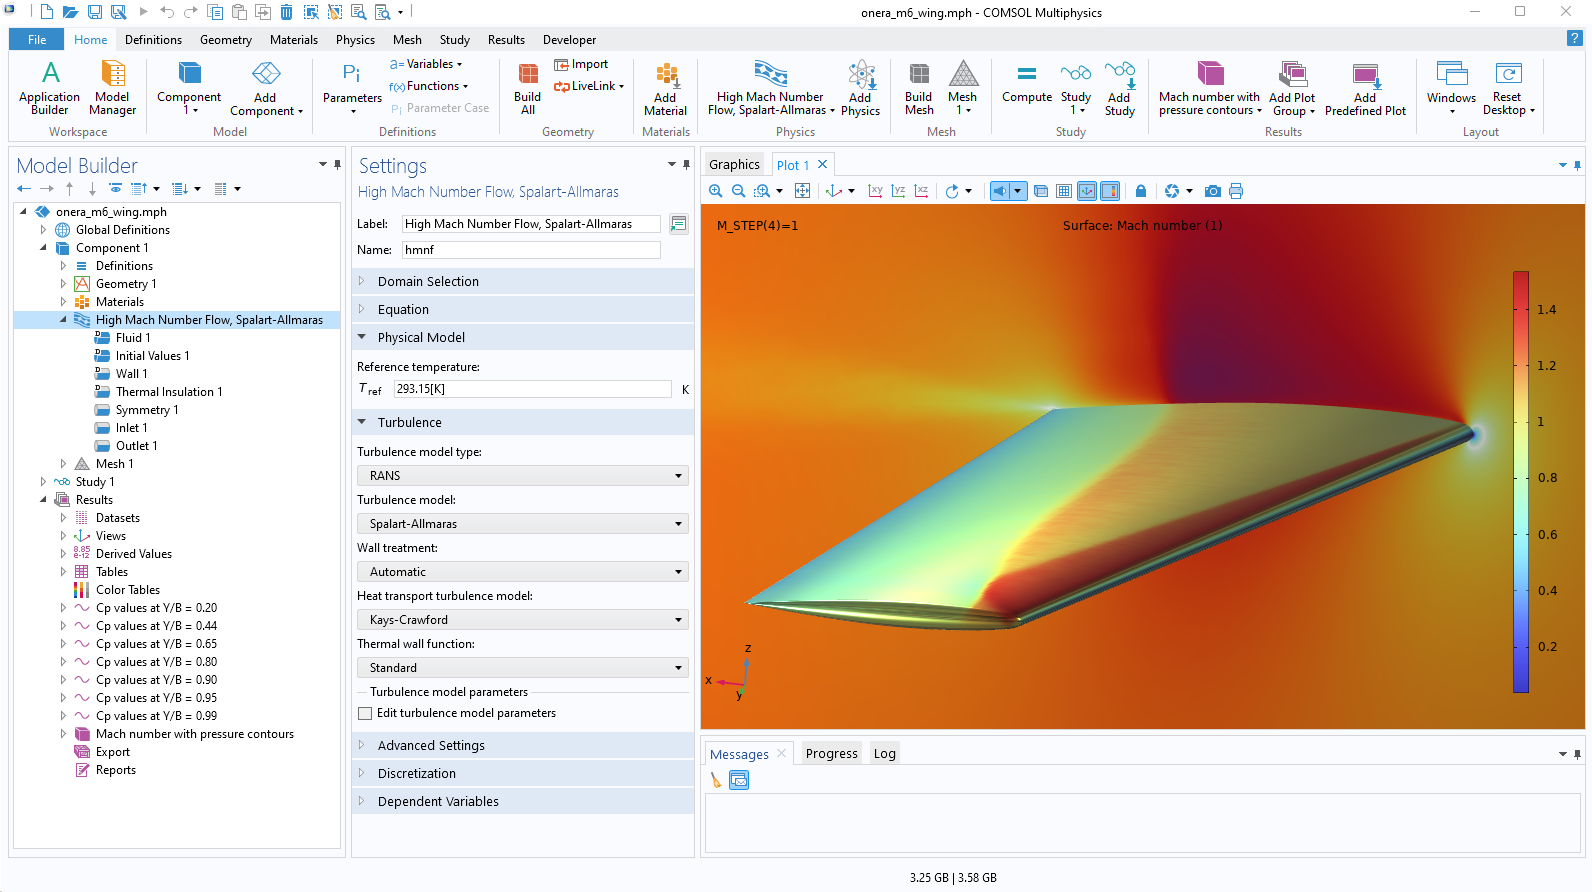 The COMSOL Multiphysics software UI with the High Mach Number Flow interface highlighted and an ONERA-M6 wing model in the Graphics window.